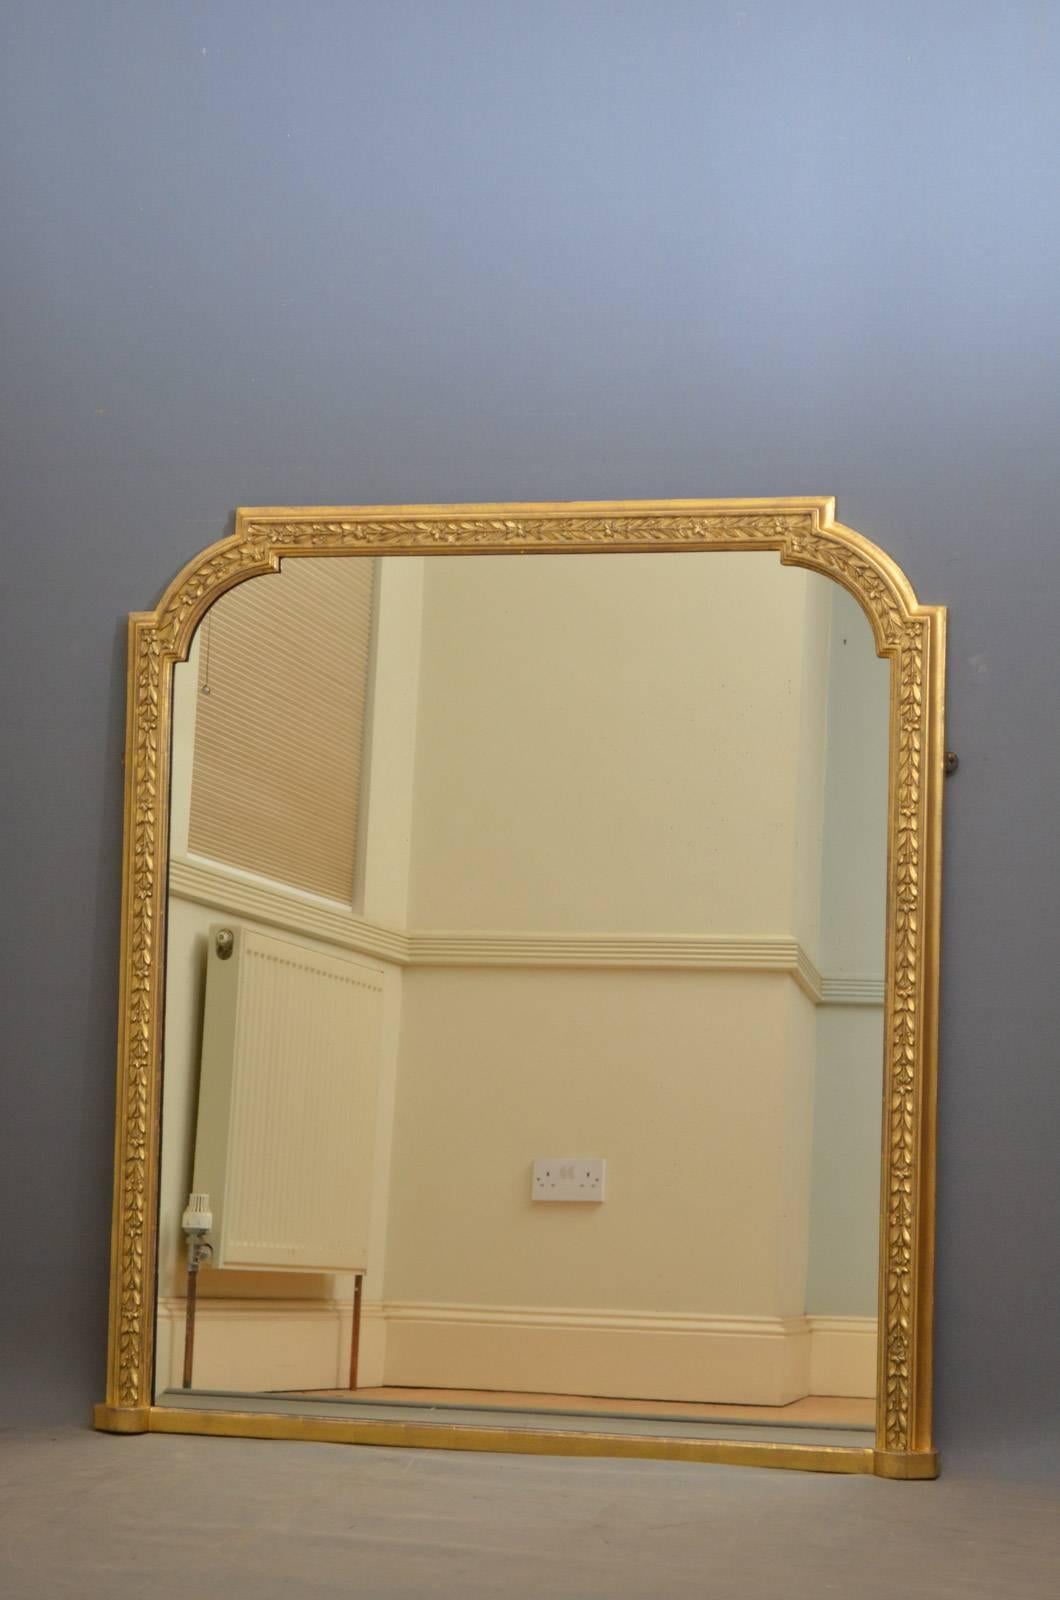 J00 Attractive Victorian wall gilt mirror of simple form, having original mirror plate with foxing in finely decorated frame. This antique mirror is in fantastic condition throughout, circa 1870.
Measures: H 49